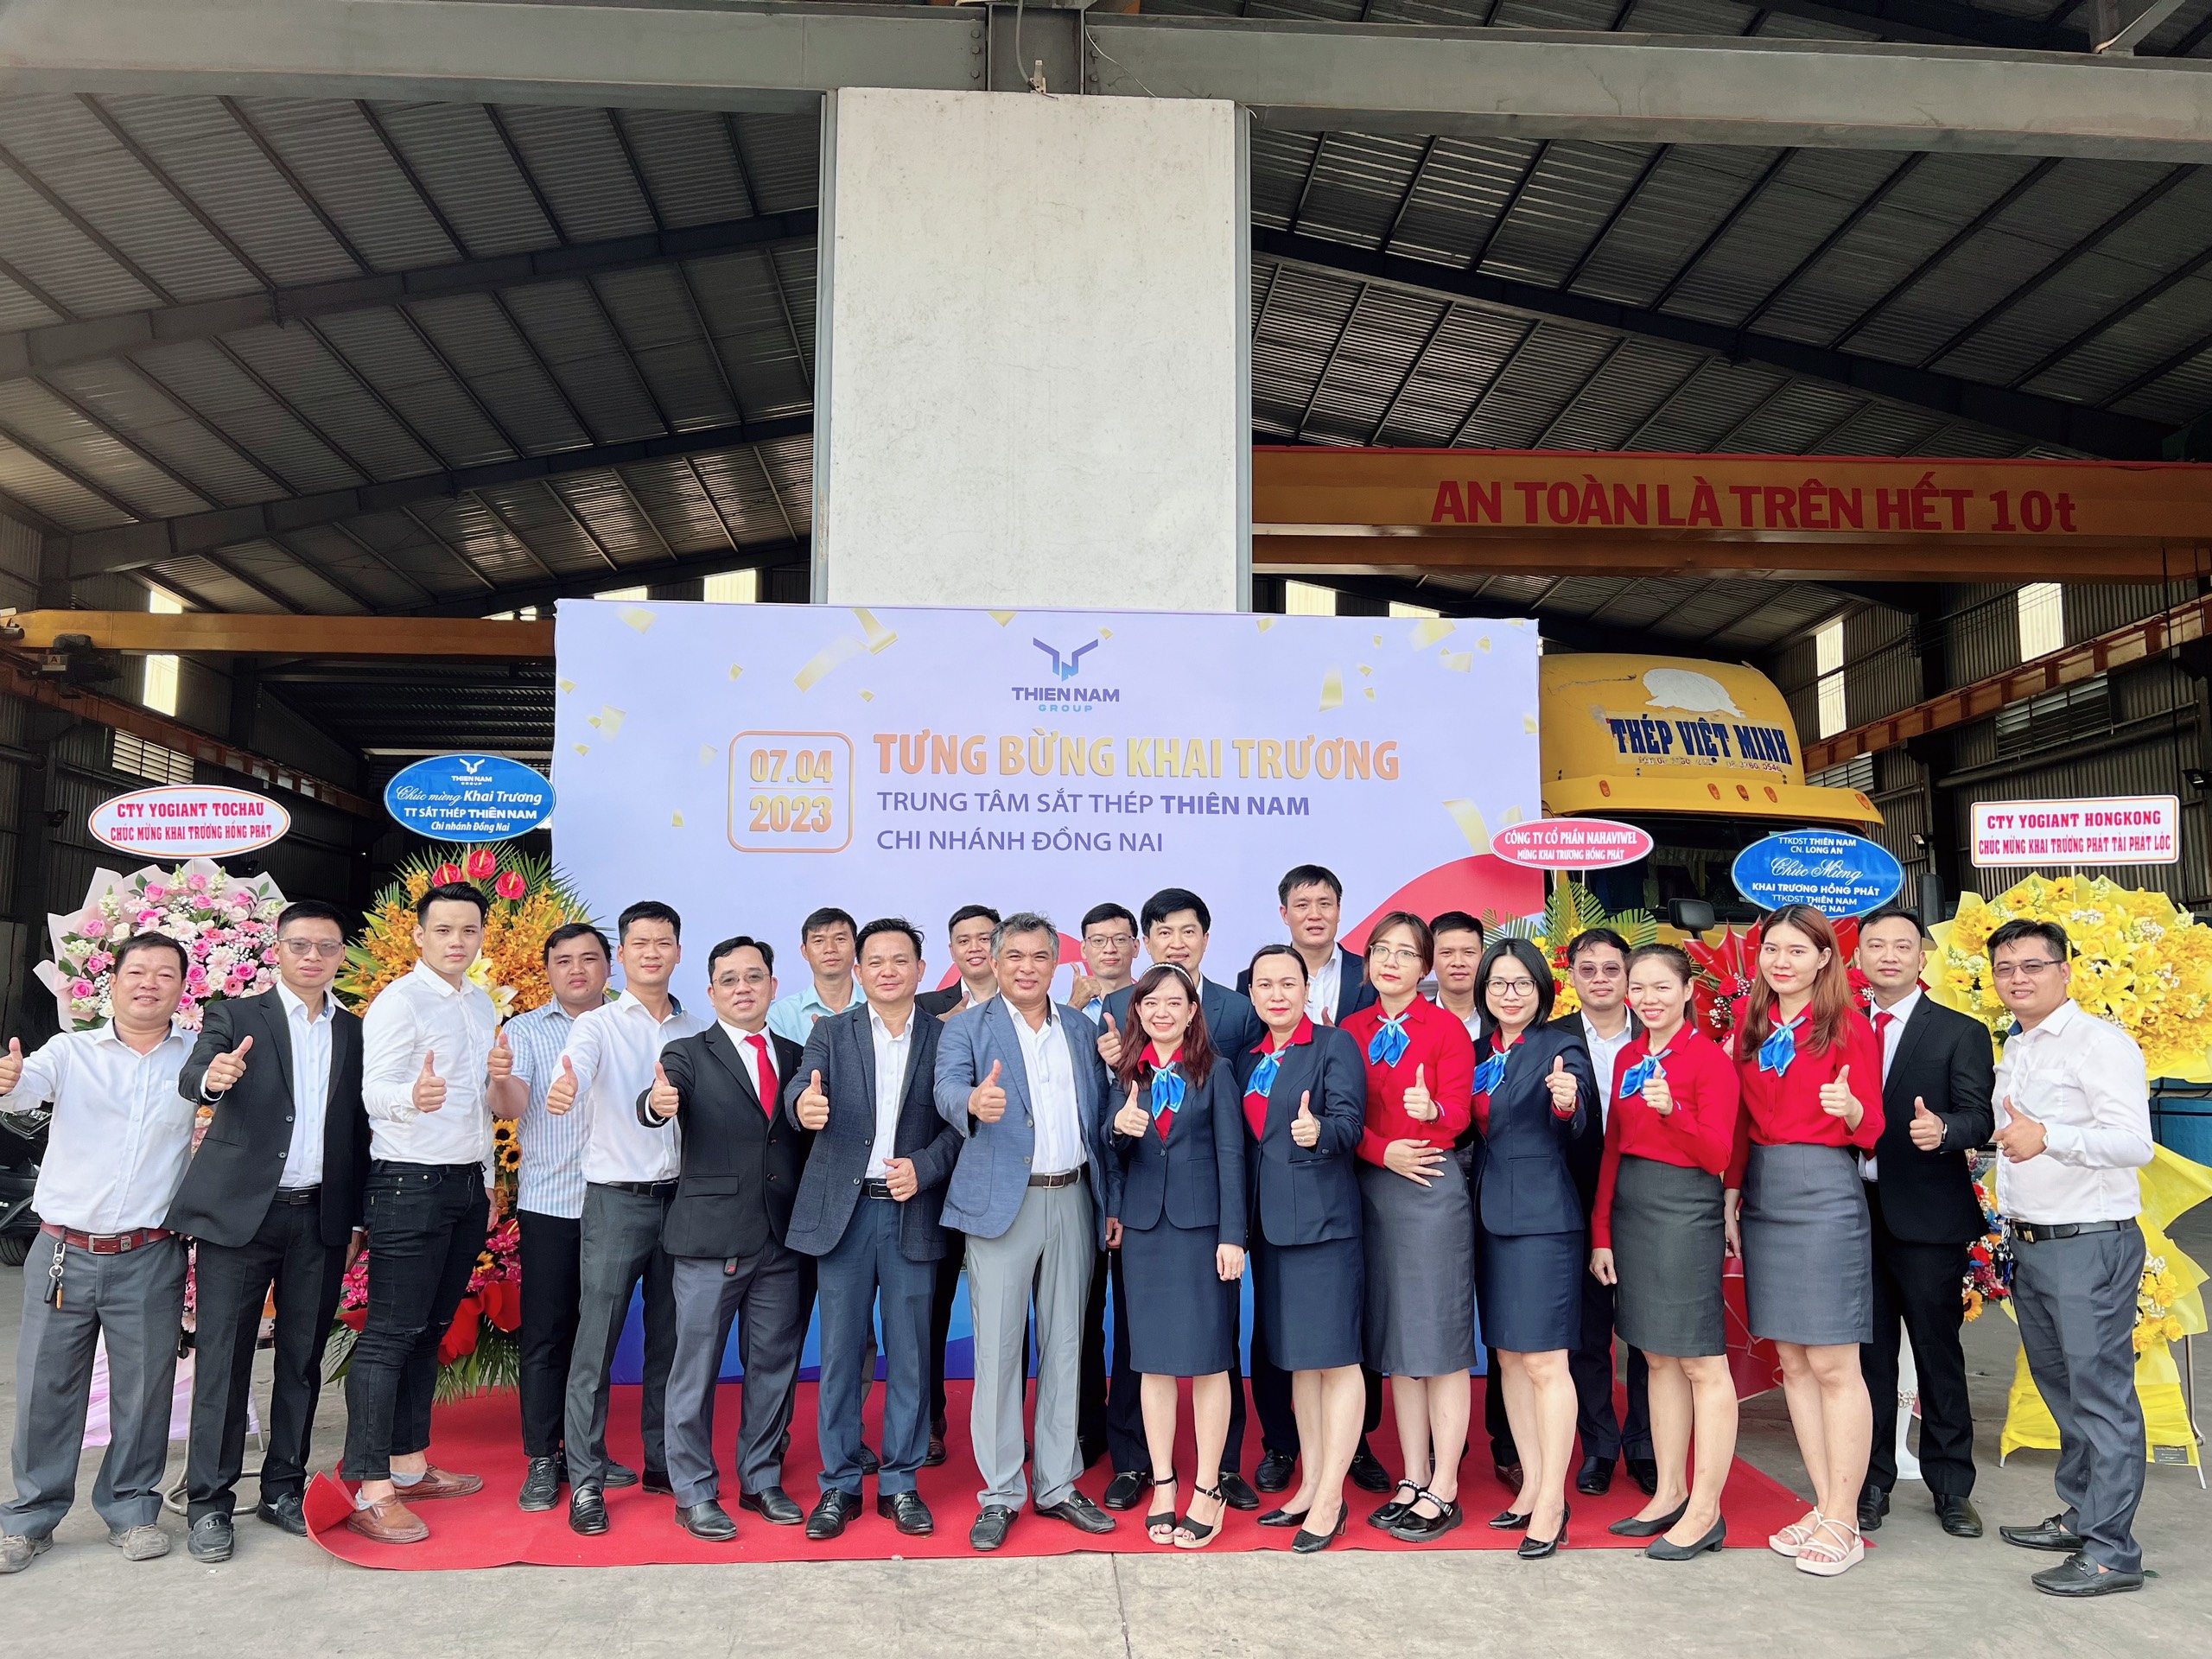 THIEN NAM GROUP OPENS IRON AND STEEL BUSINESS BRANCH IN BIEN HOA – DONG NAI